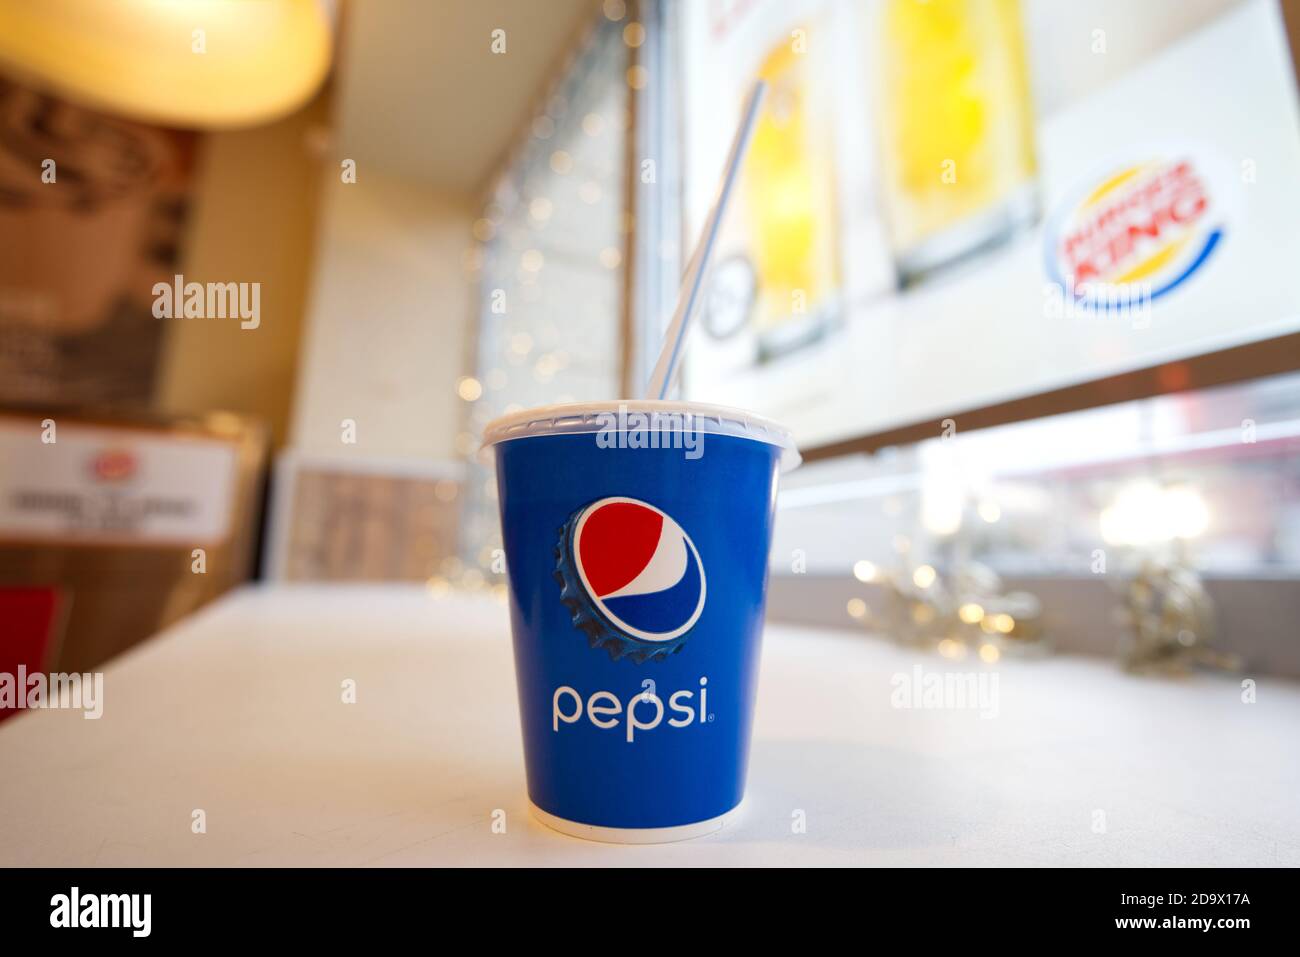 Pepsi paper soda cup on table in Burger King fast food restaurant Stock Photo